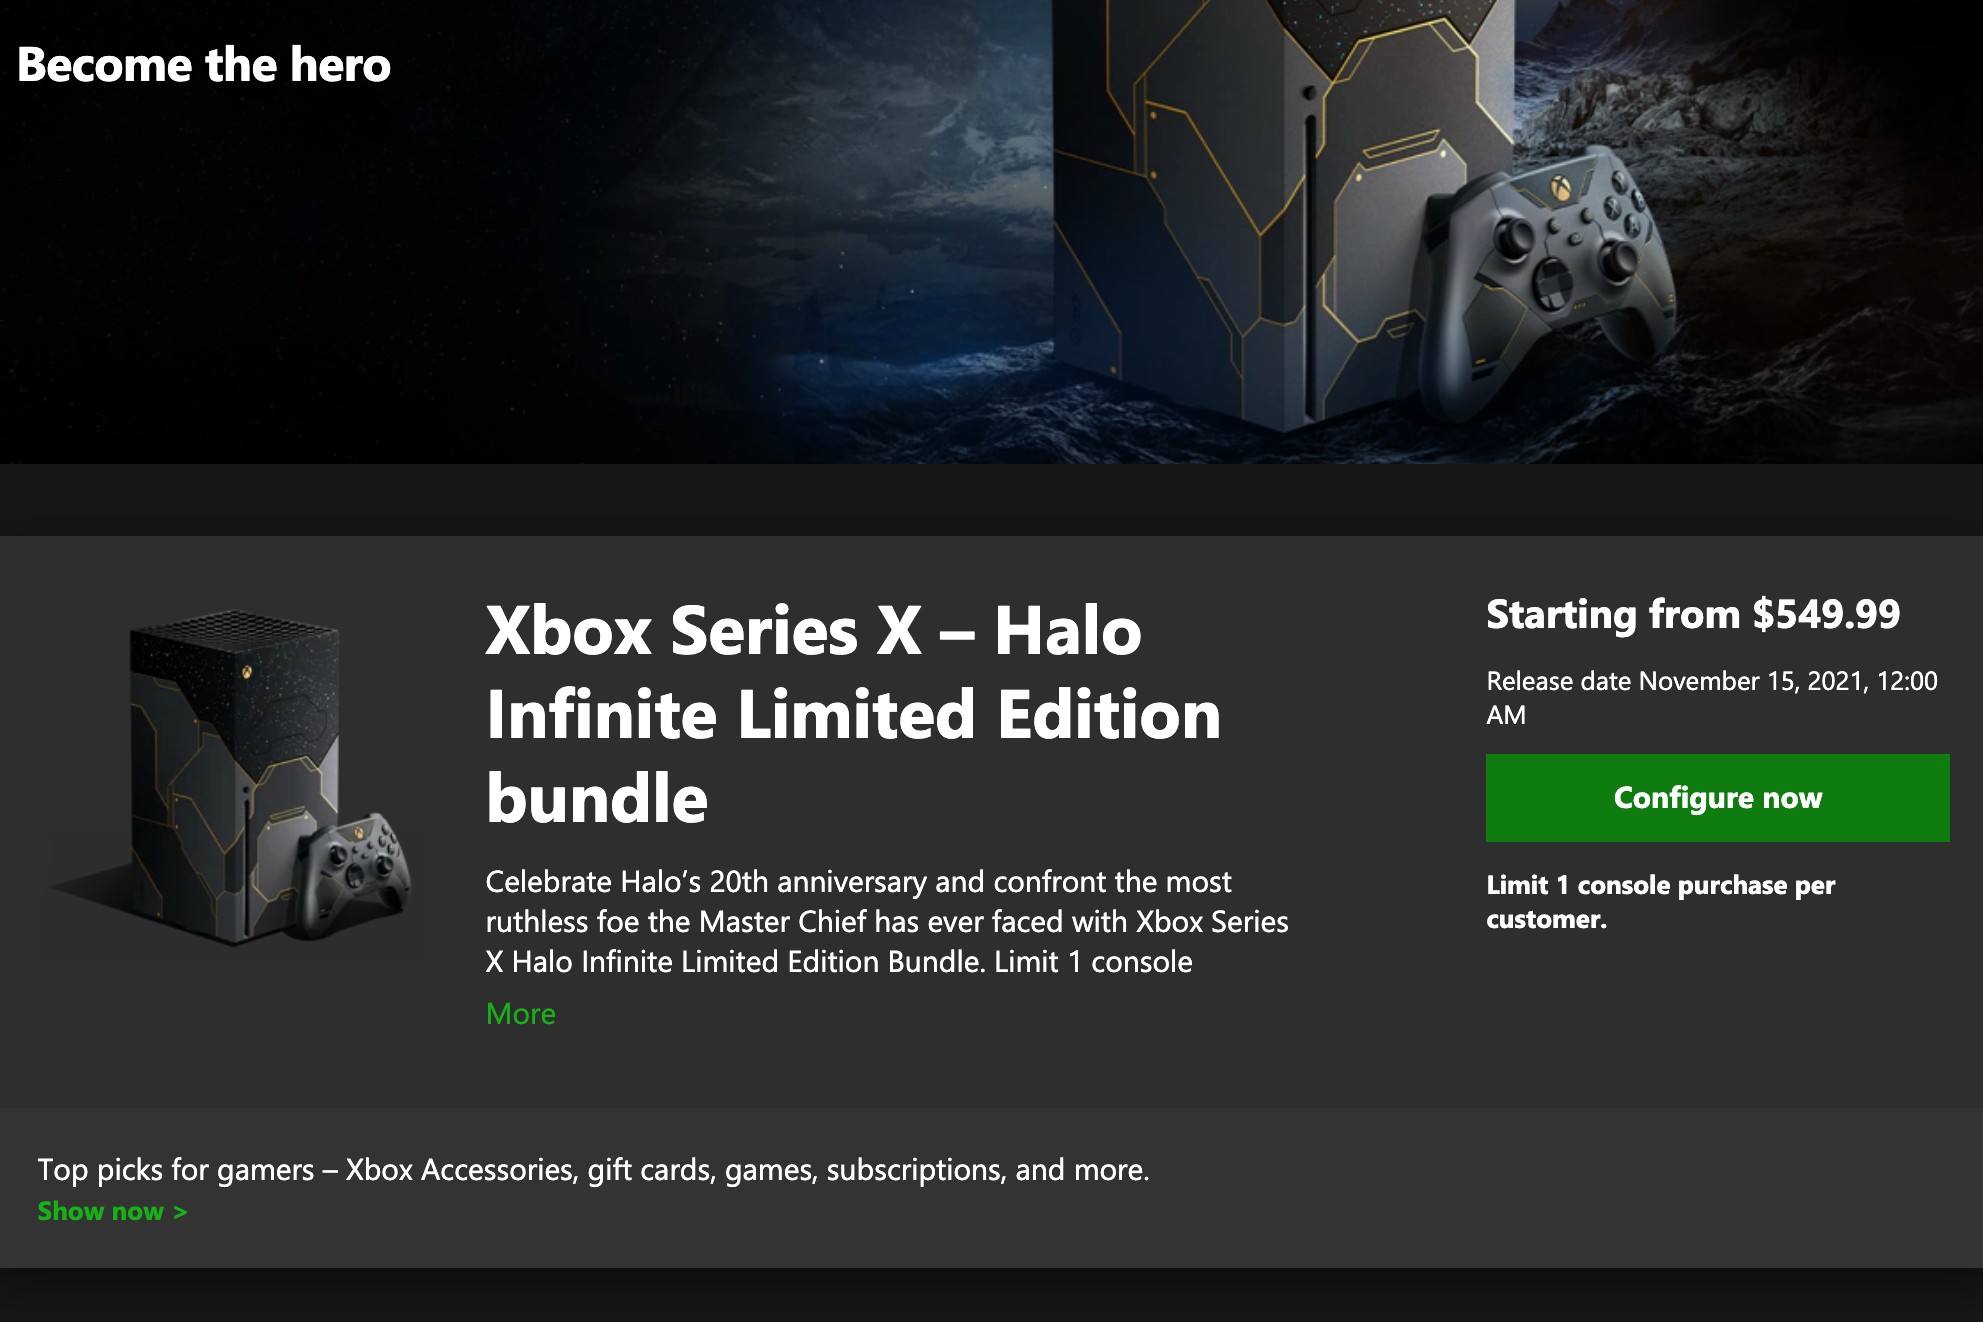  How to pre-order the limited edition Halo Infinite Xbox Series X